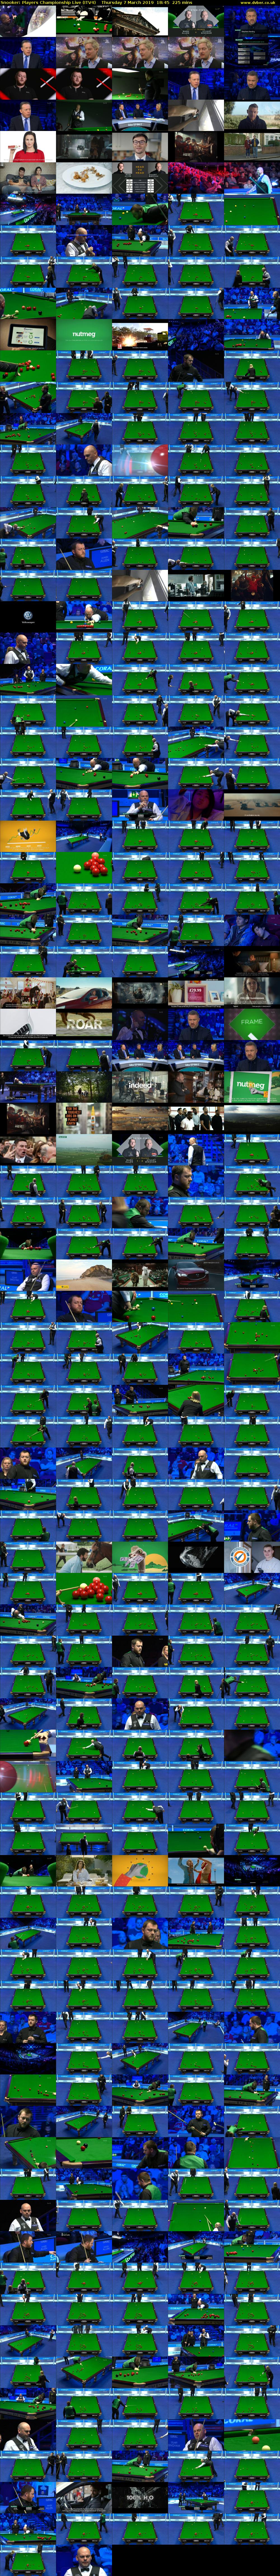 Snooker: Players Championship Live (ITV4) Thursday 7 March 2019 18:45 - 22:30